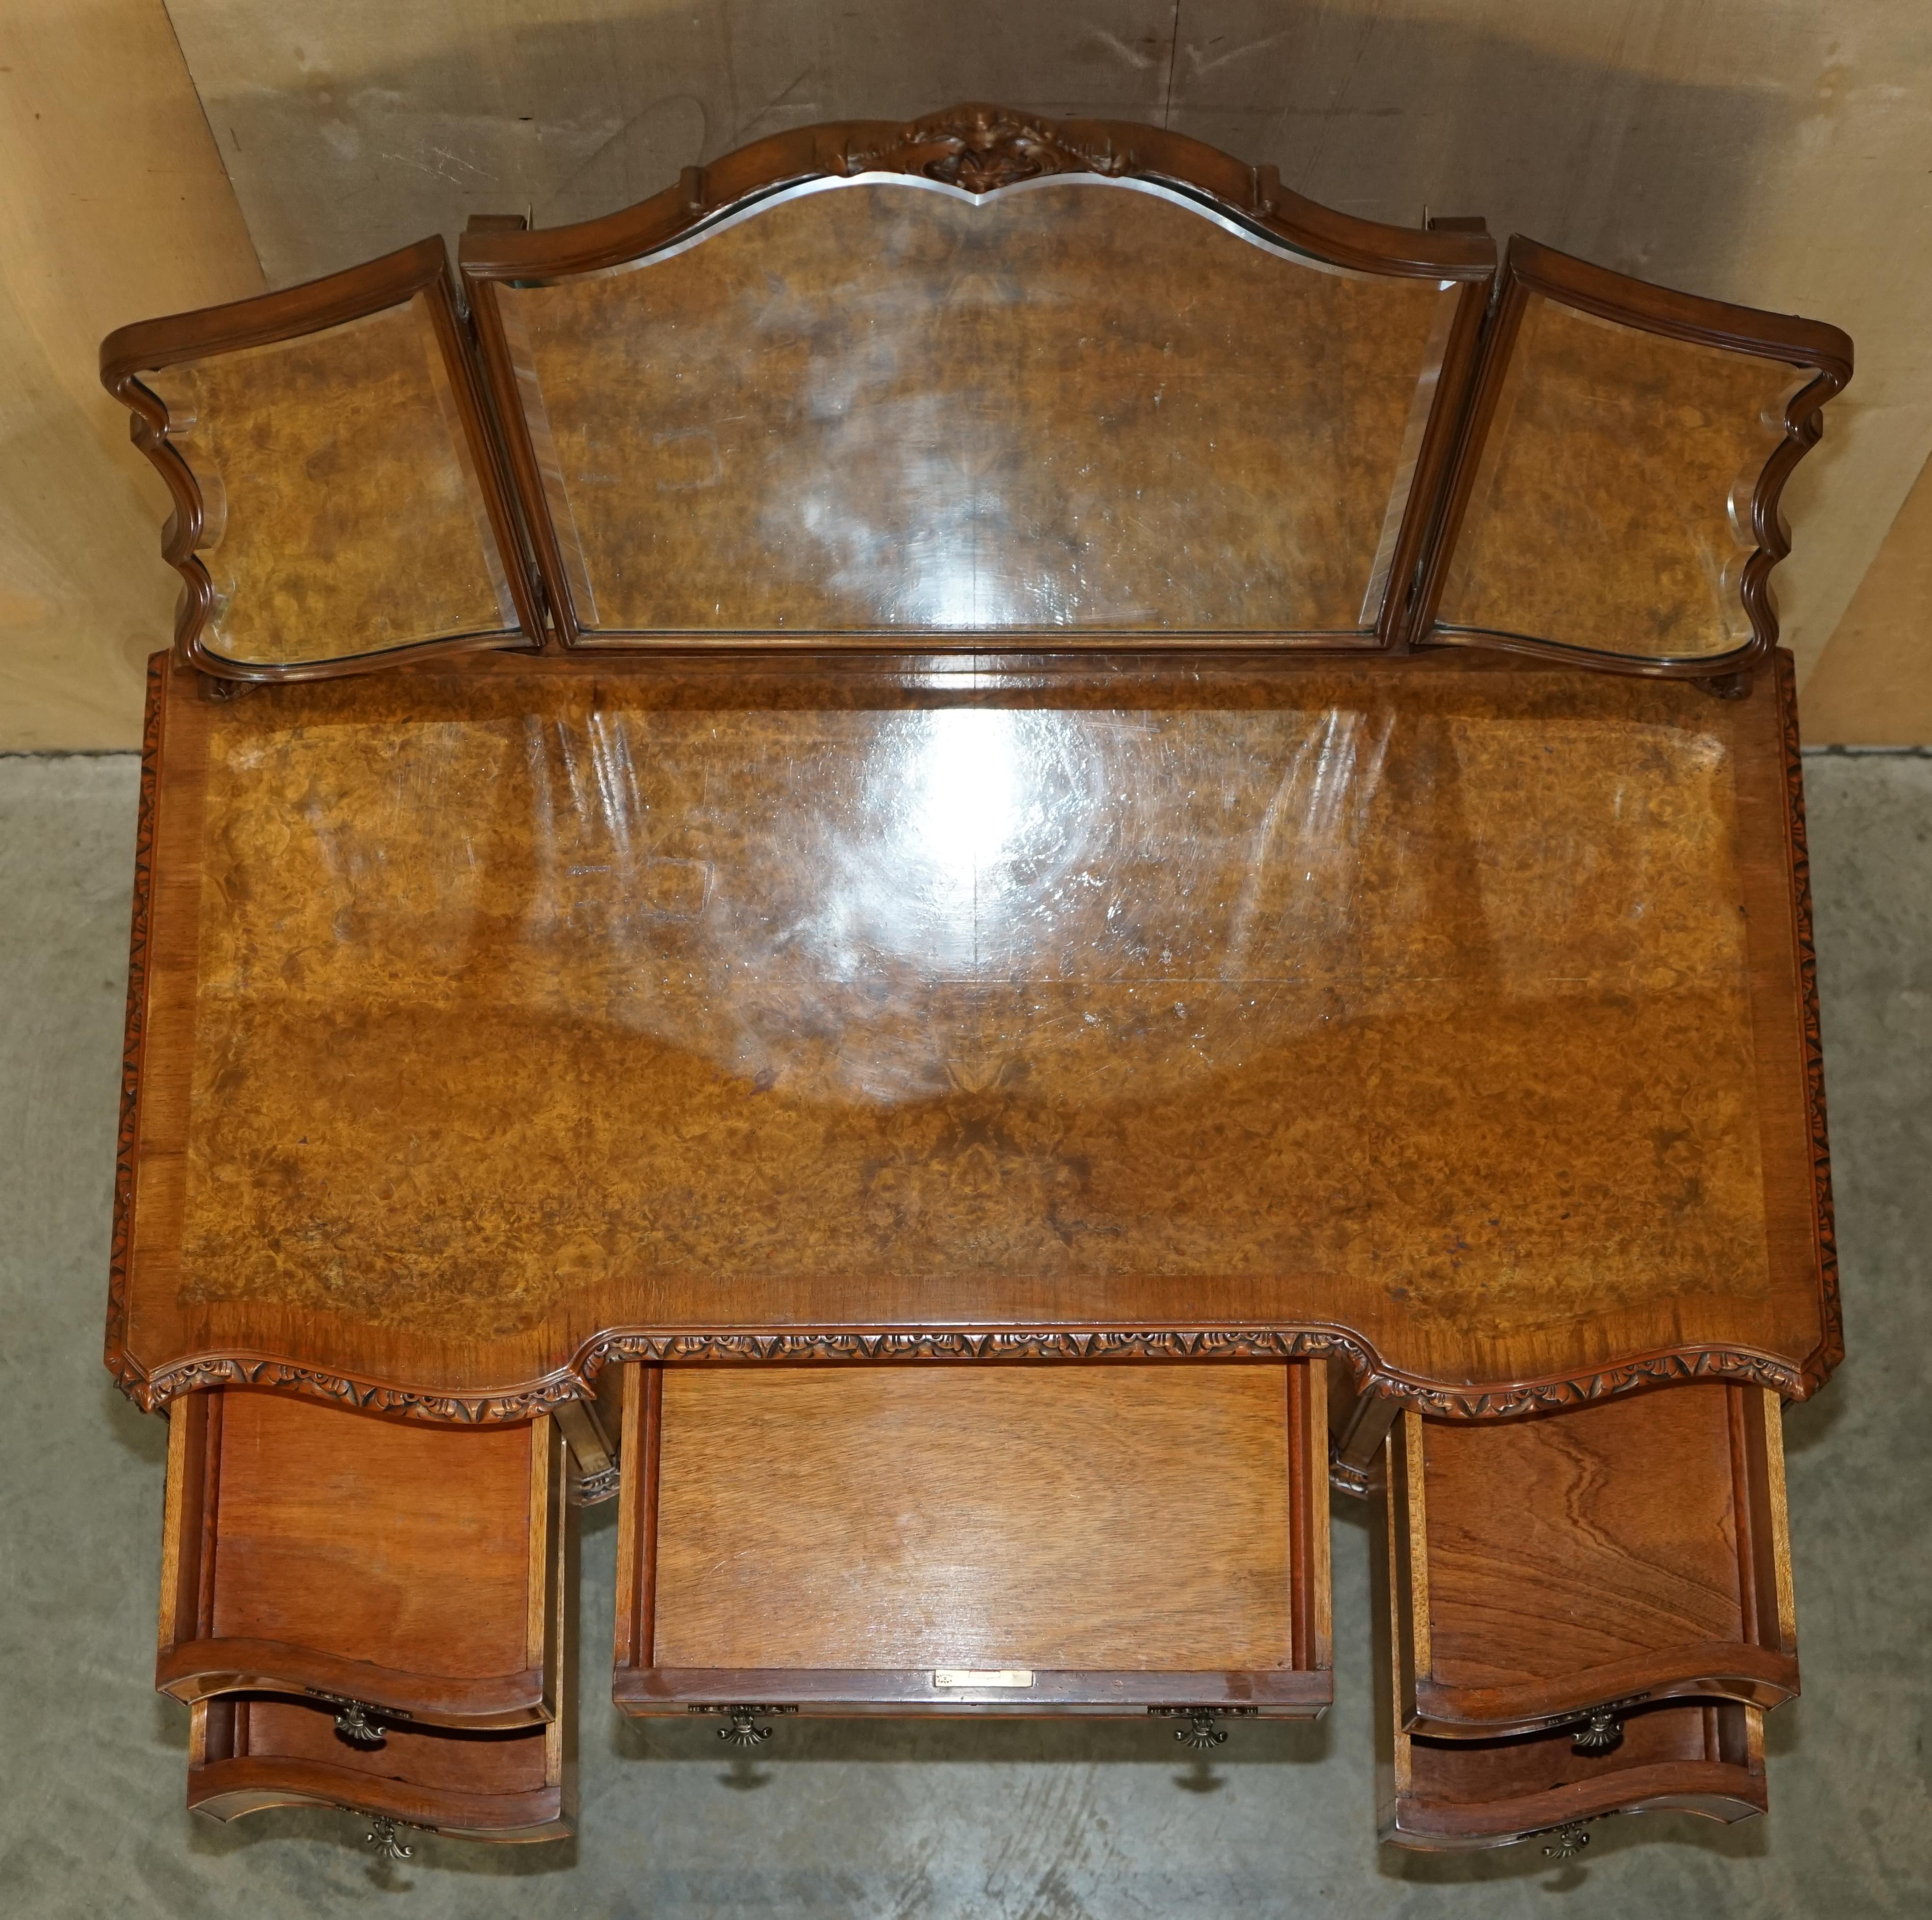 SUBLIME MAPLE & CO BURR WALNUT HAND CARVED DRESSING TABLE PART OF SUiTE im Angebot 12